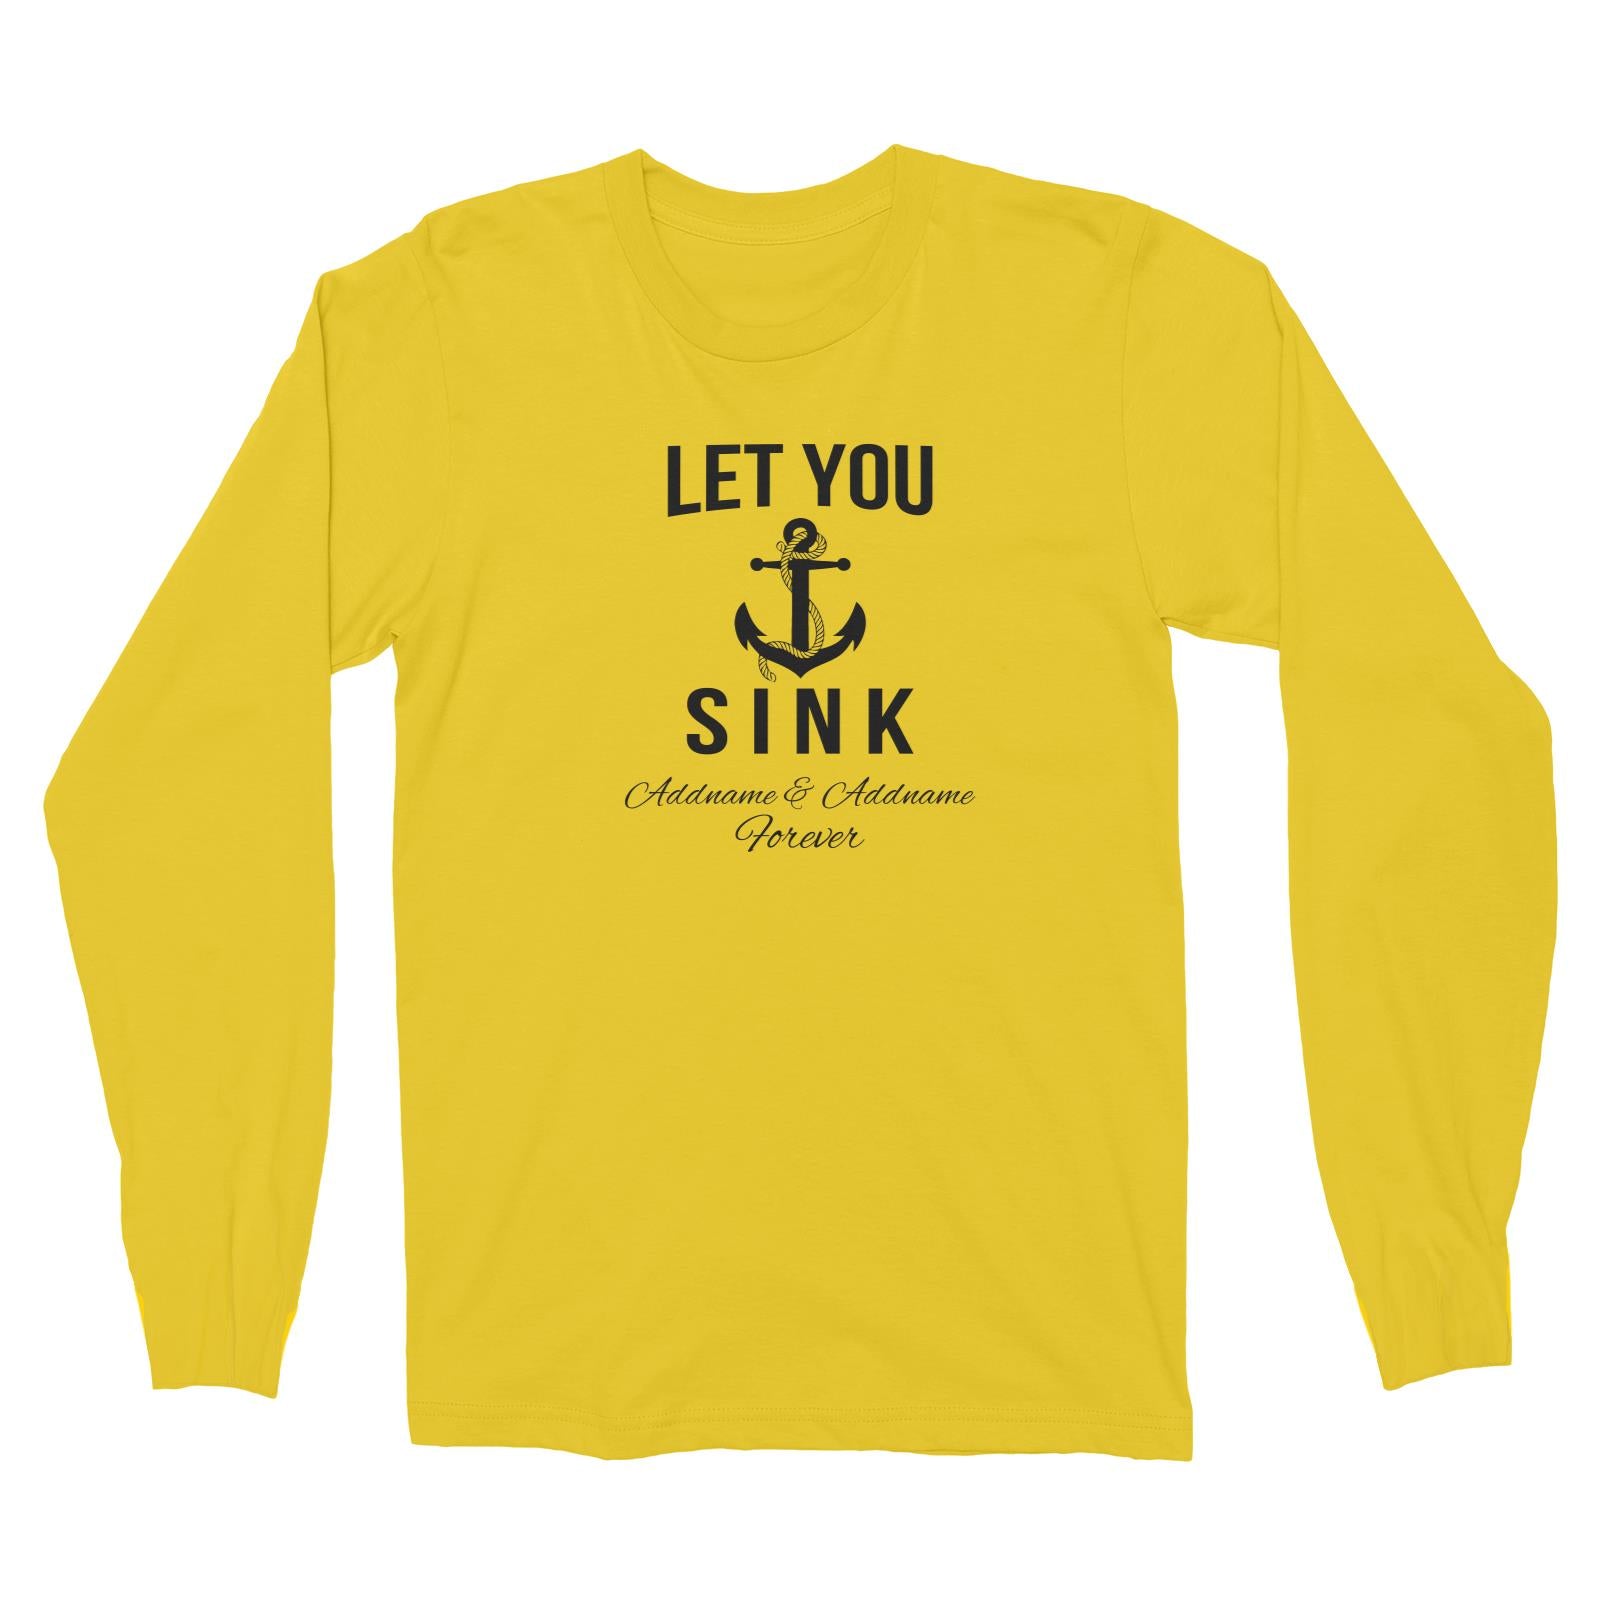 Couple Series Let You Sink Addname & Addname Forever Long Sleeve Unisex T-Shirt